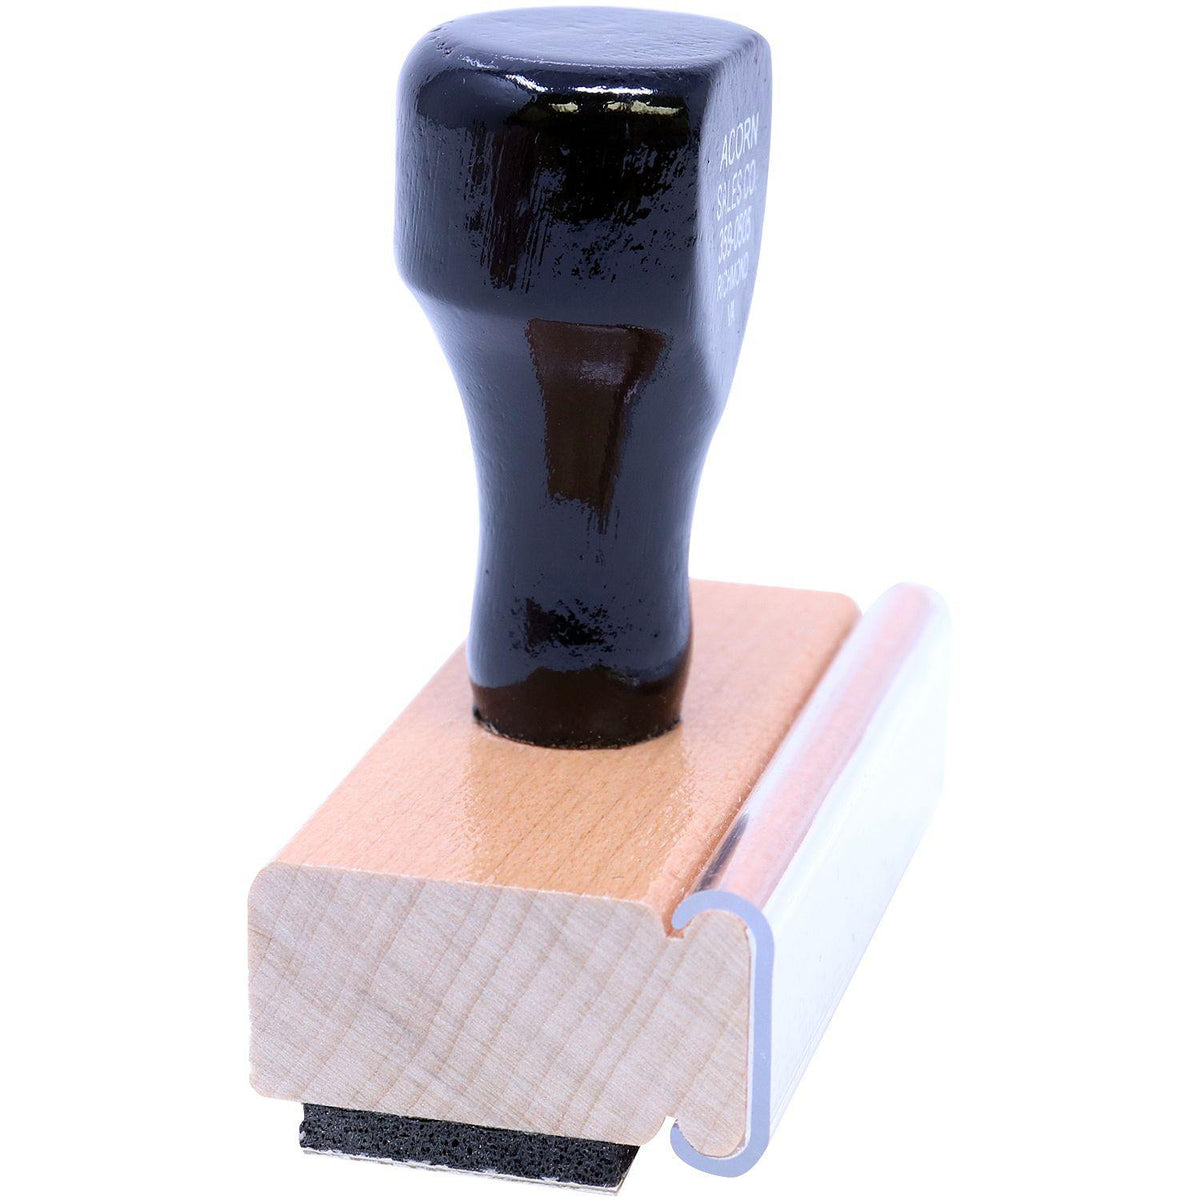 Side View of Large Please Finish At Home And Return To Teacher Rubber Stamp at an Angle